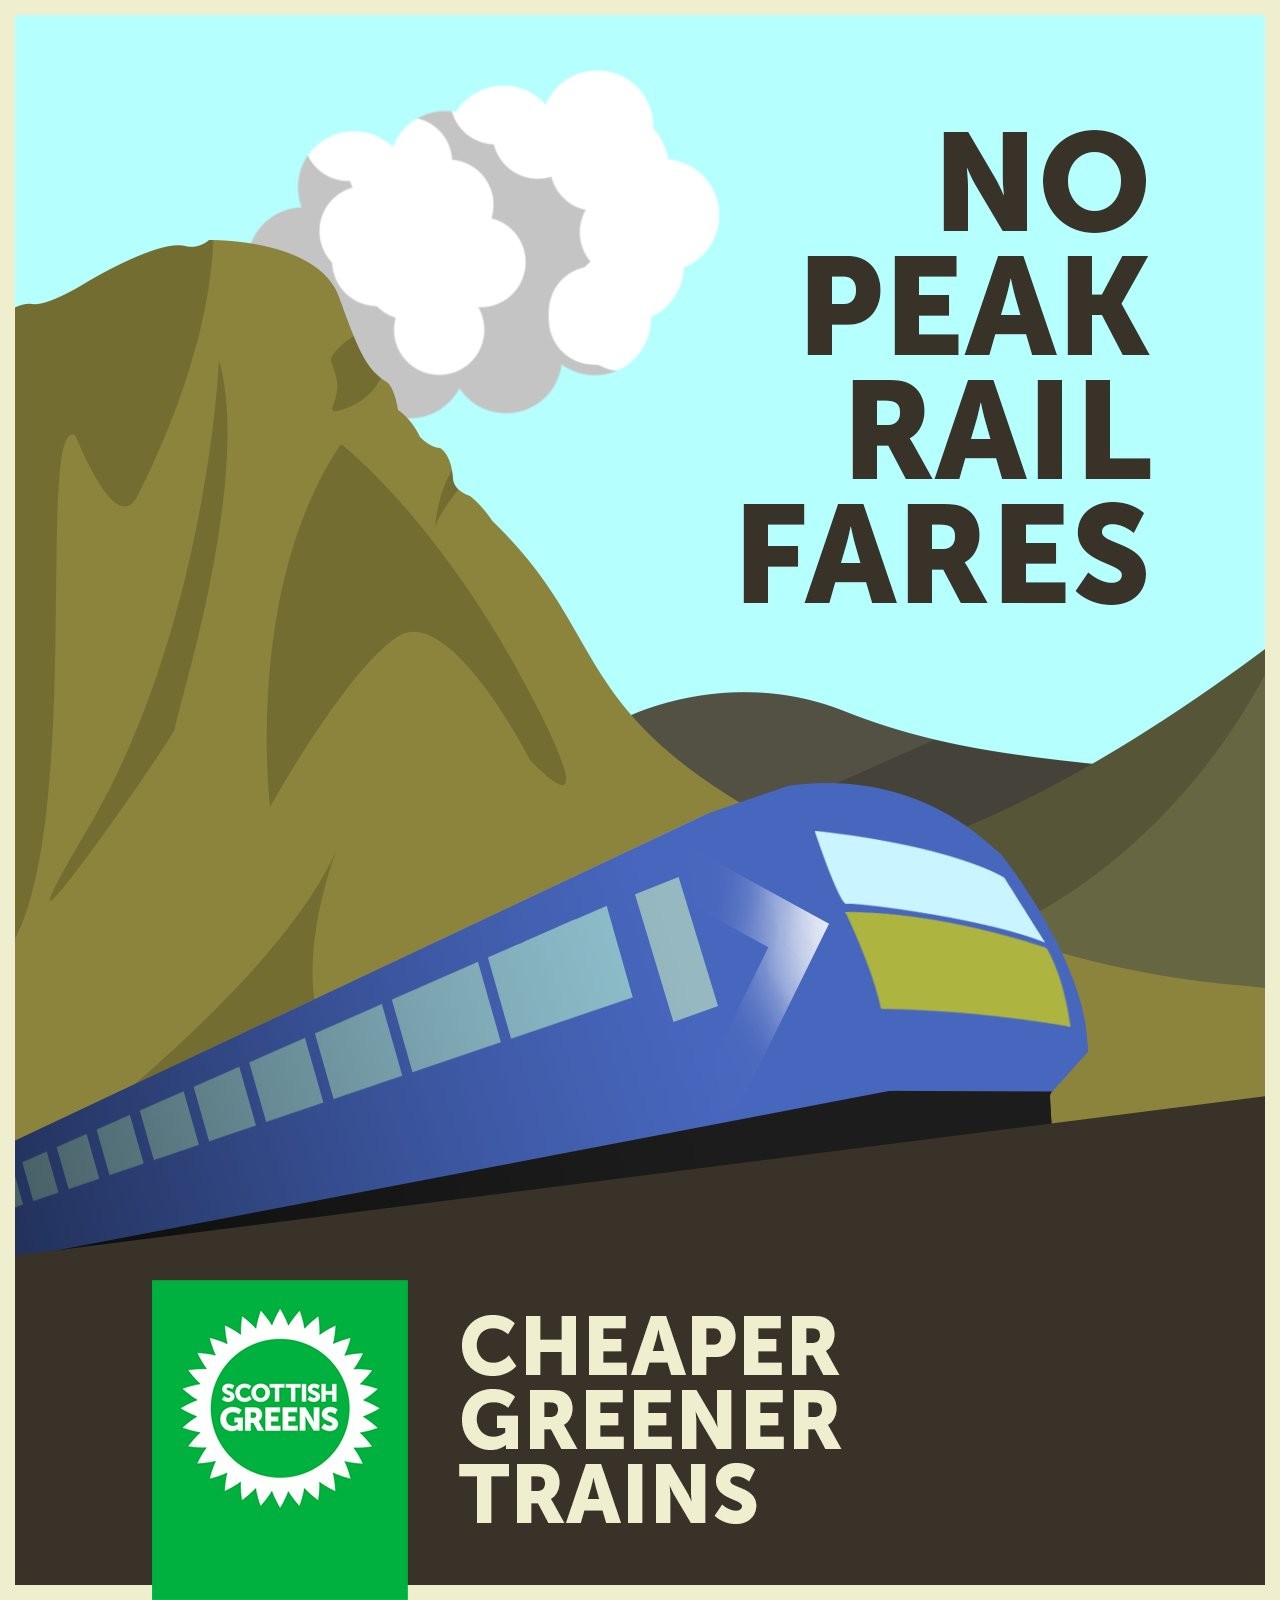 No peak rail fares from 2 October. Cheaper Greener Trains.
Under the text is a drawing of a Scotrail train travelling through the Highlands.